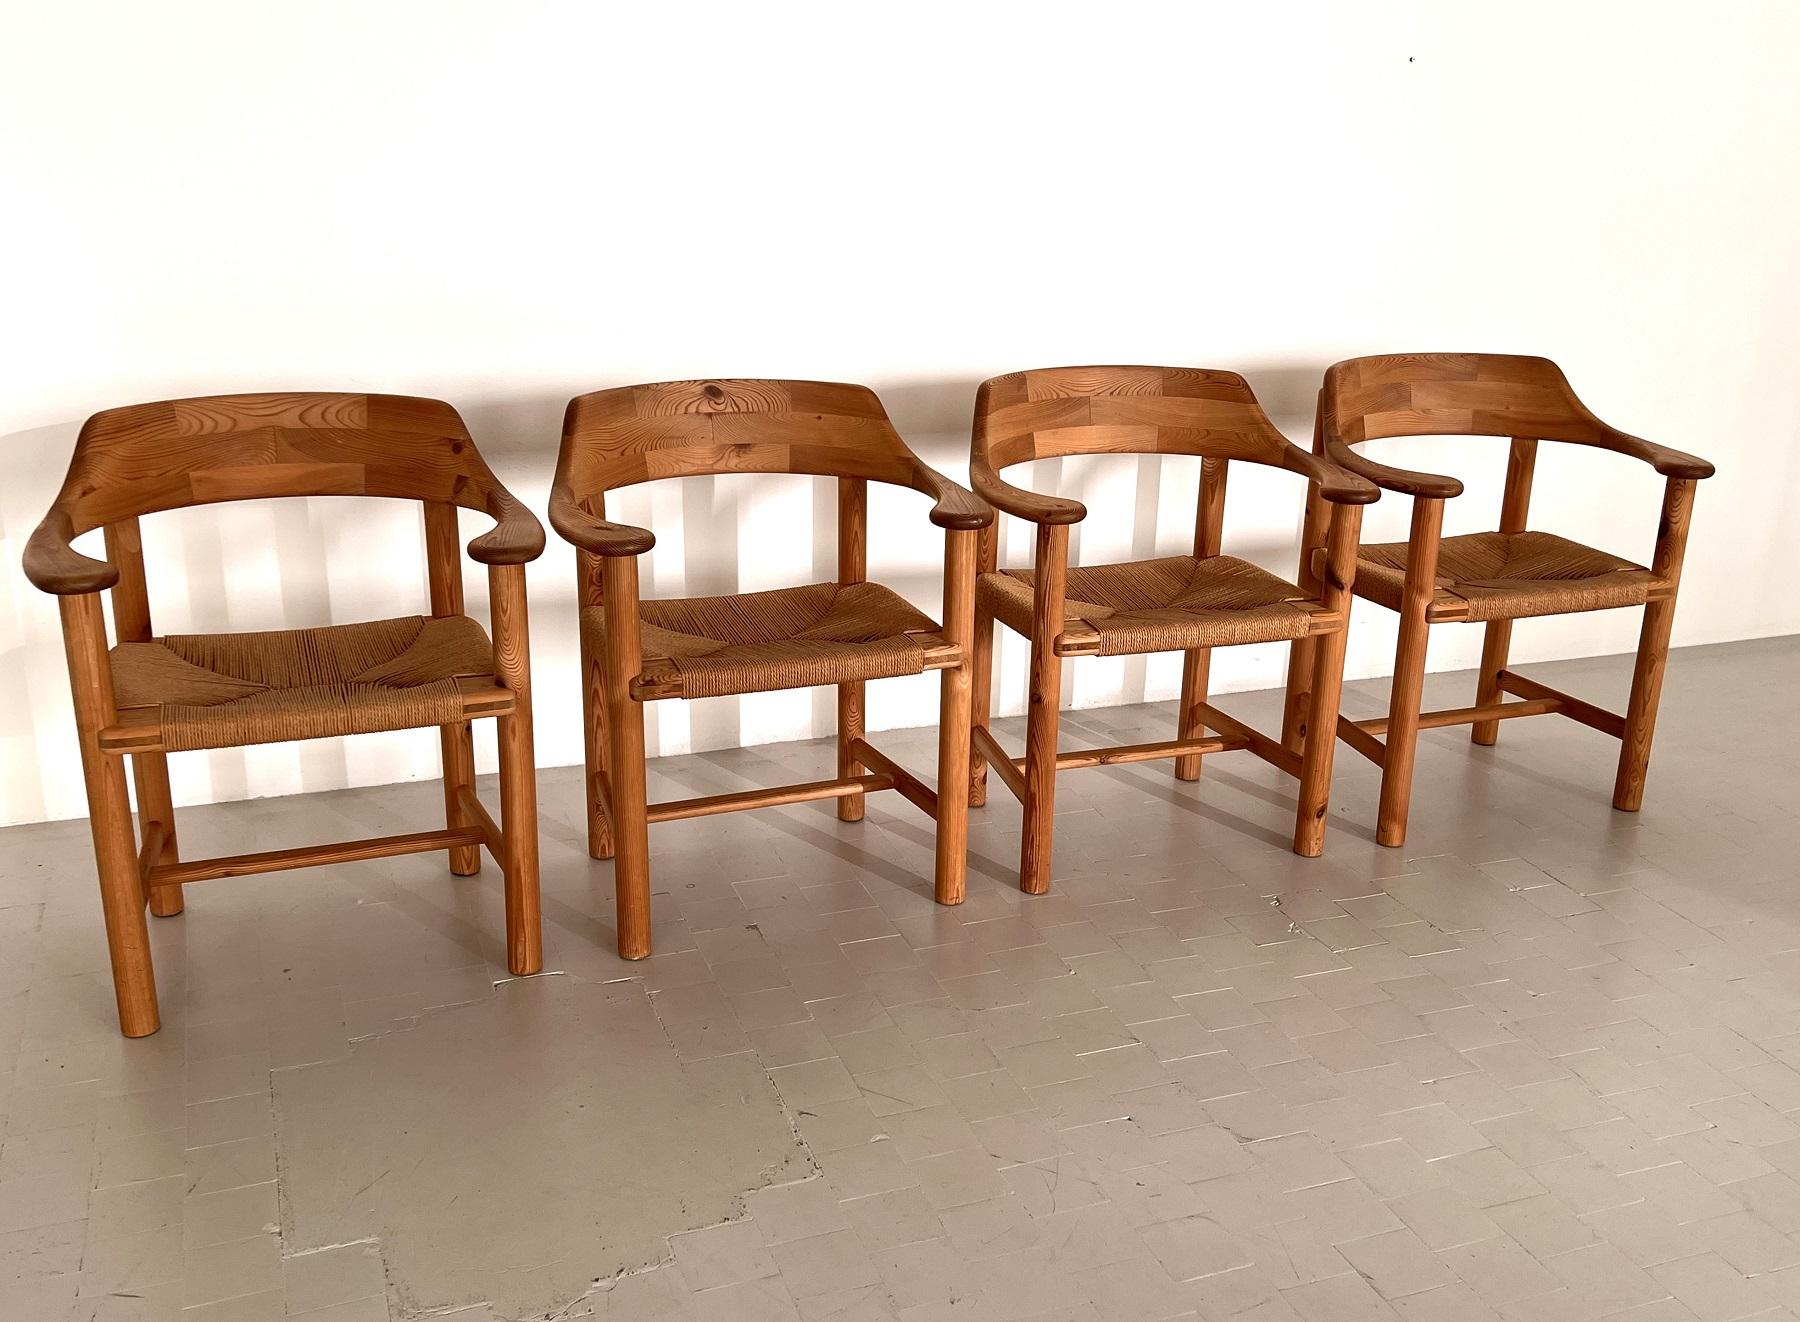 Danish Rainer Daumiller Dining Chairs in Pine and Paper Cord, 1970s For Sale